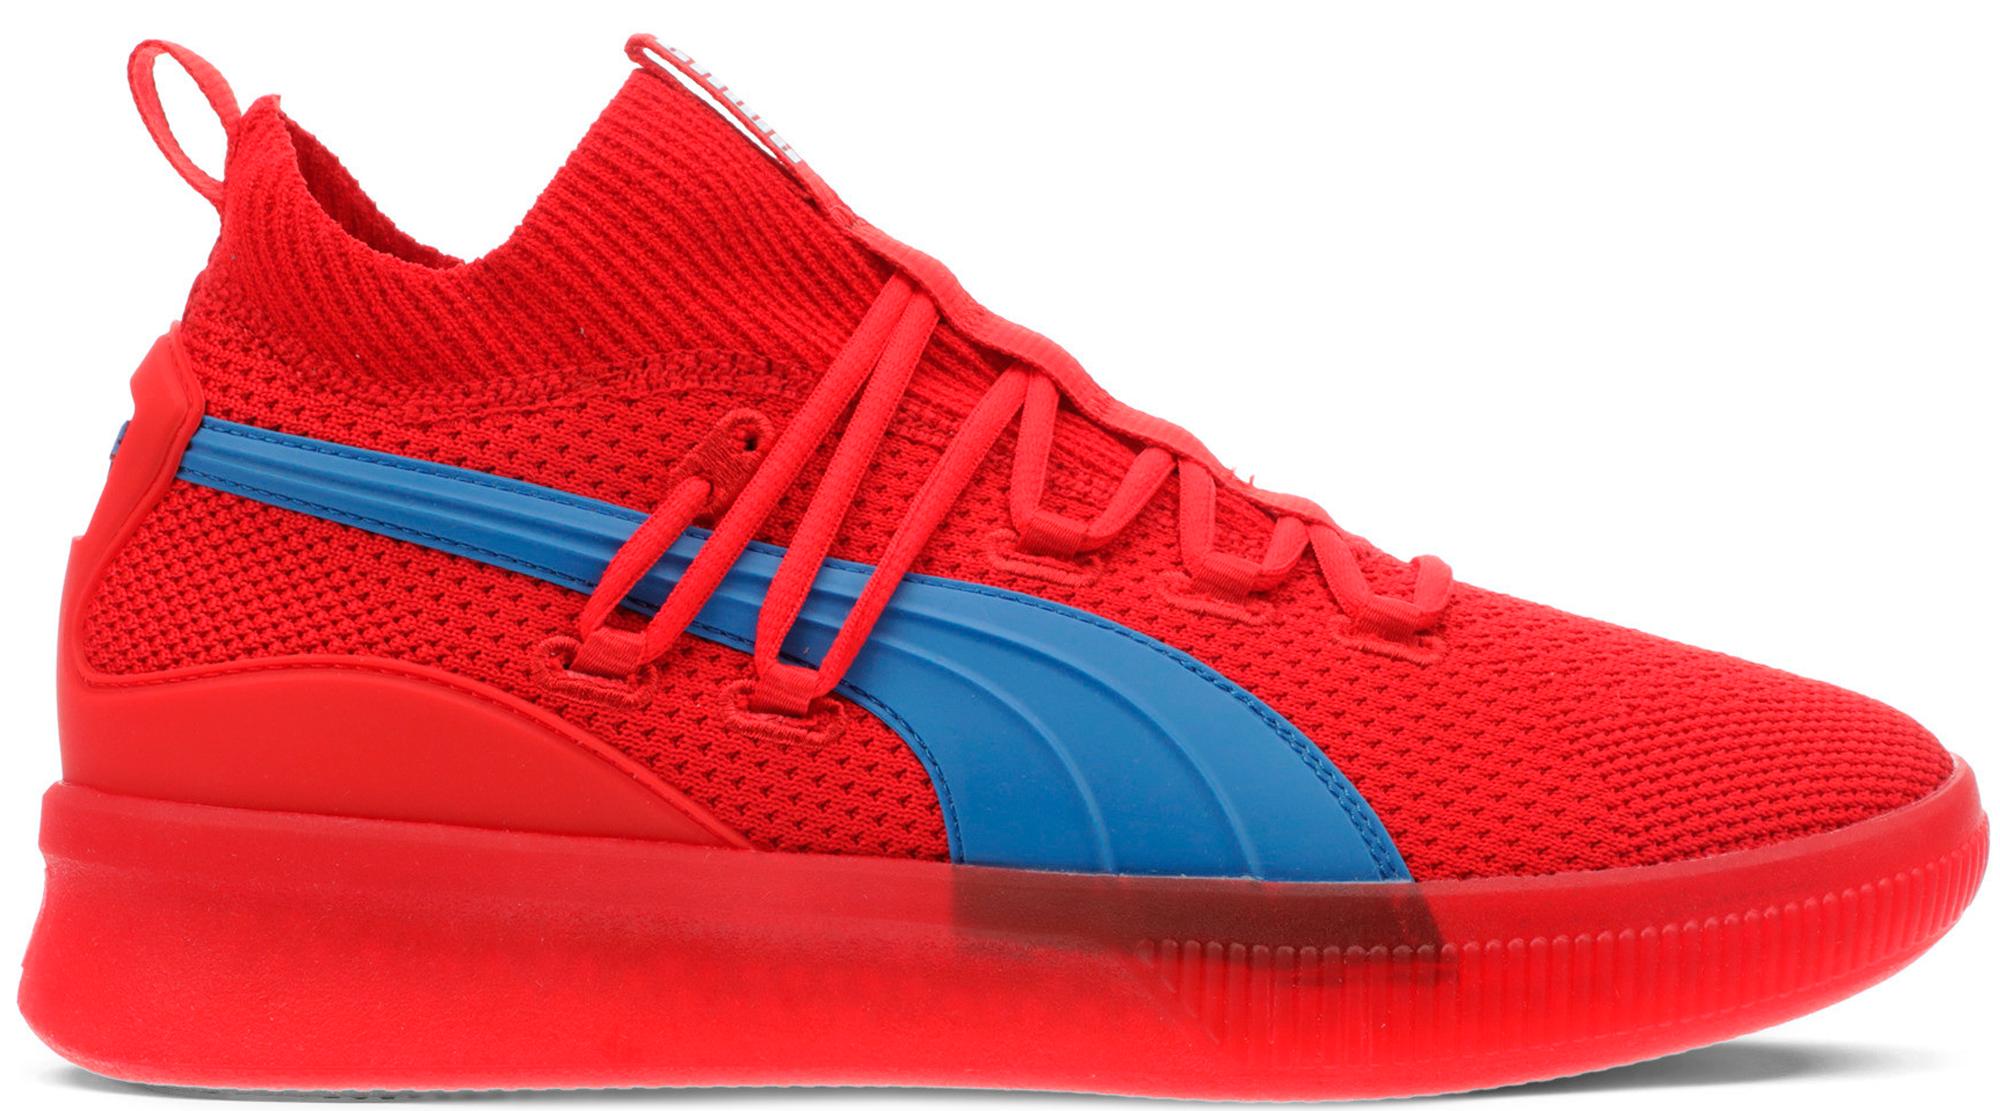 PUMA Rubber Clyde Court Red/blu for Men 